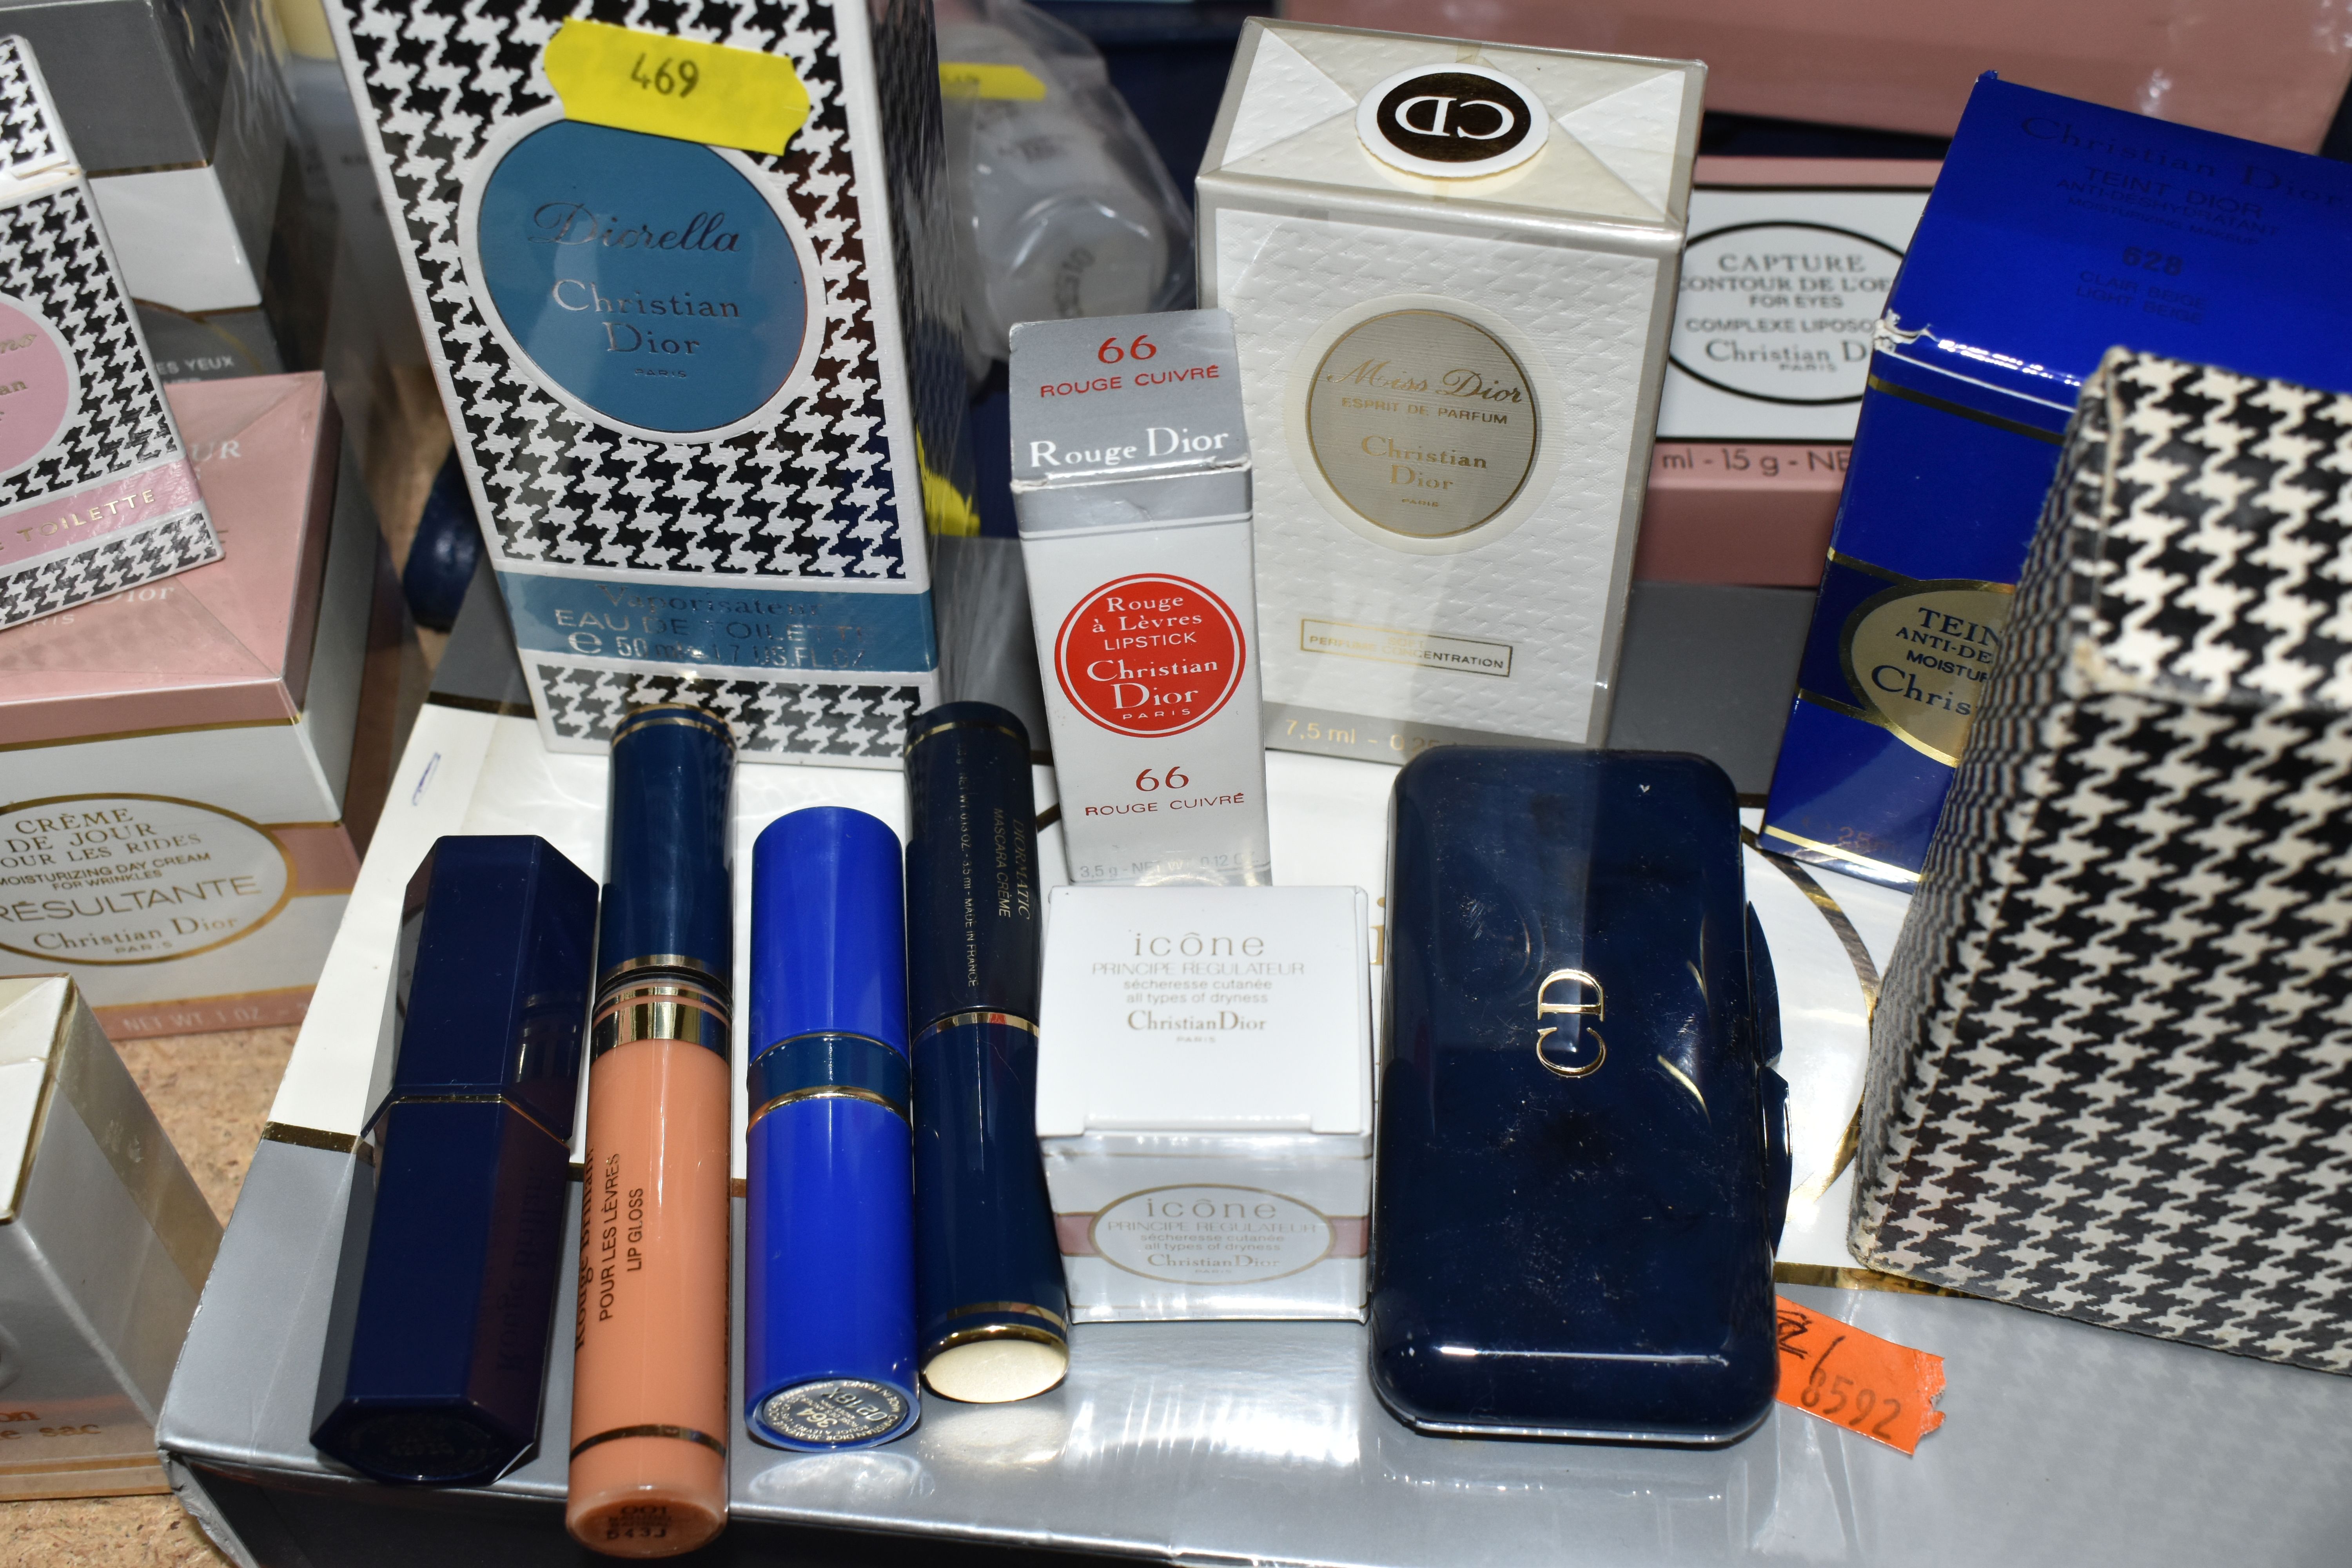 VINTAGE CHRISTIAN DIOR AND MISS DIOR TOILETRIES ETC, to include a boxed Eau de Cologne and soap gift - Image 2 of 5